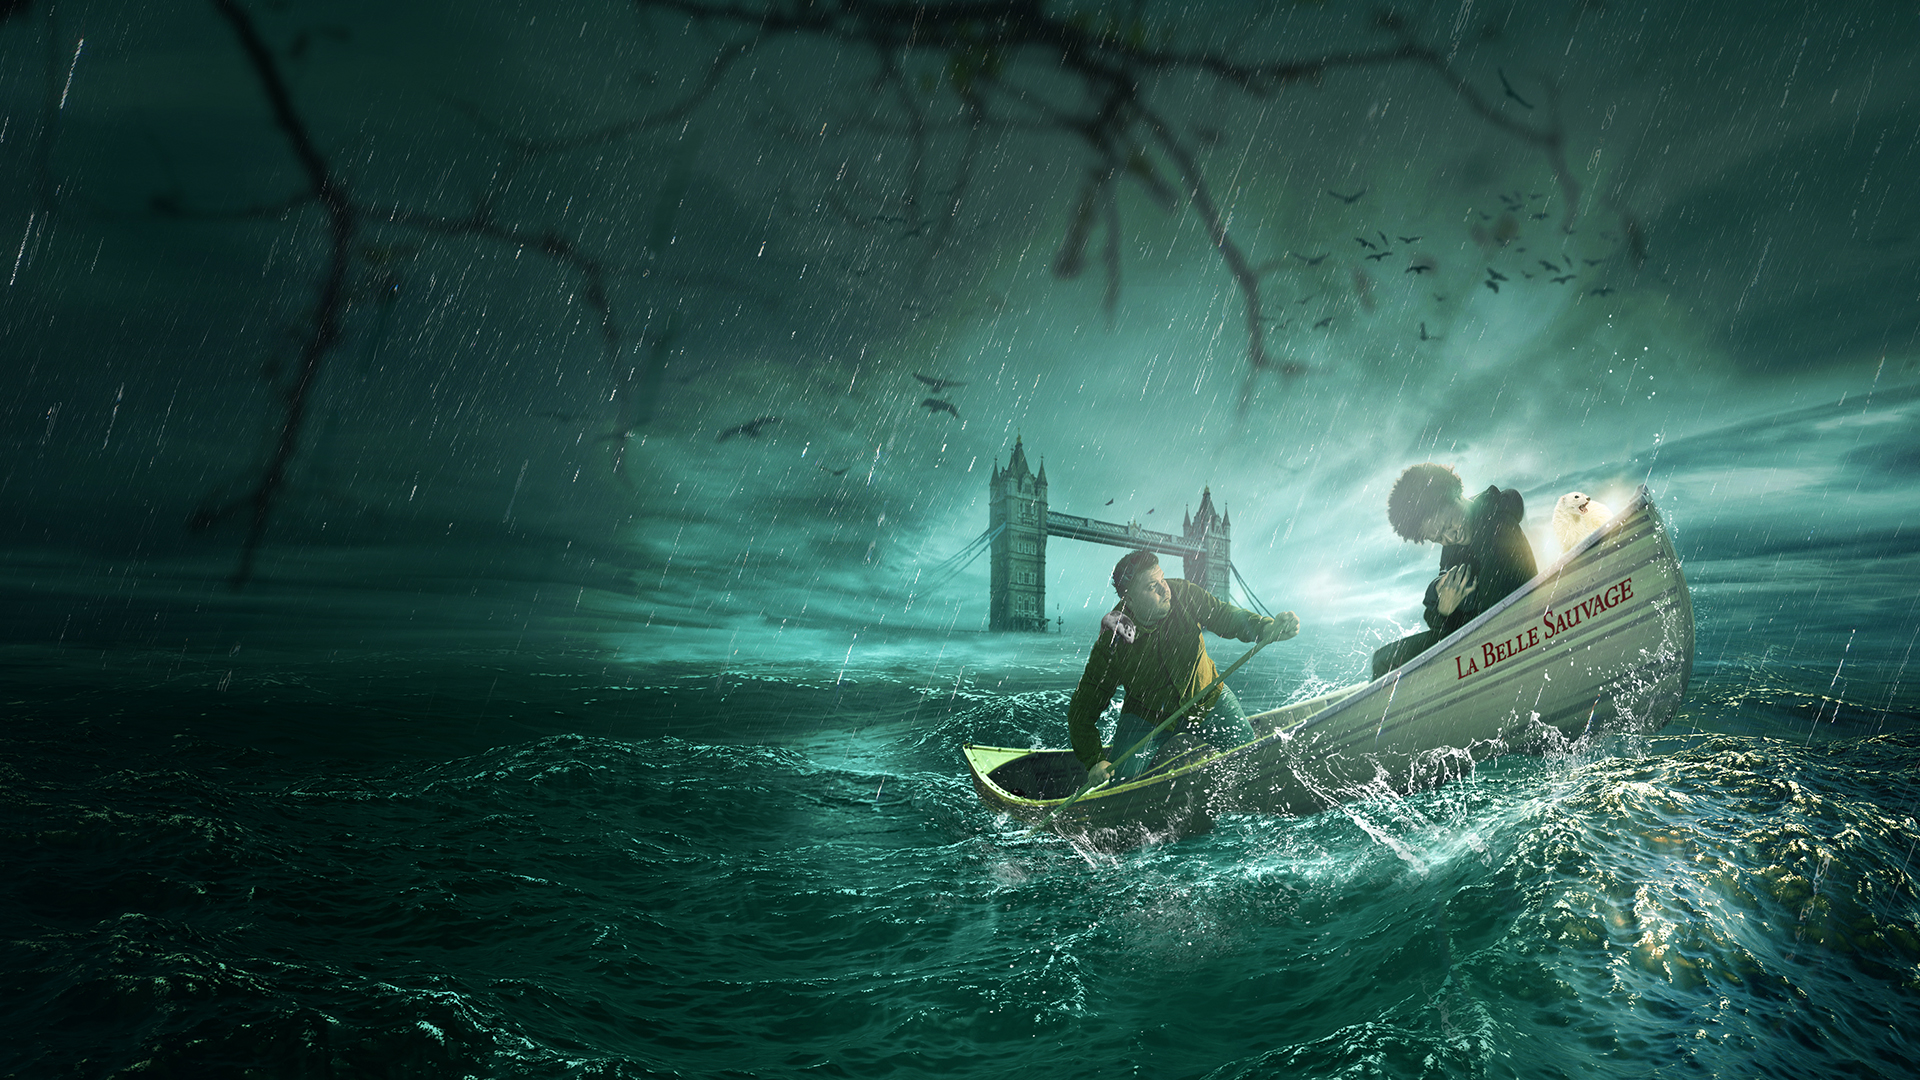 Stormy_seas_with_two_people_in_row_boat